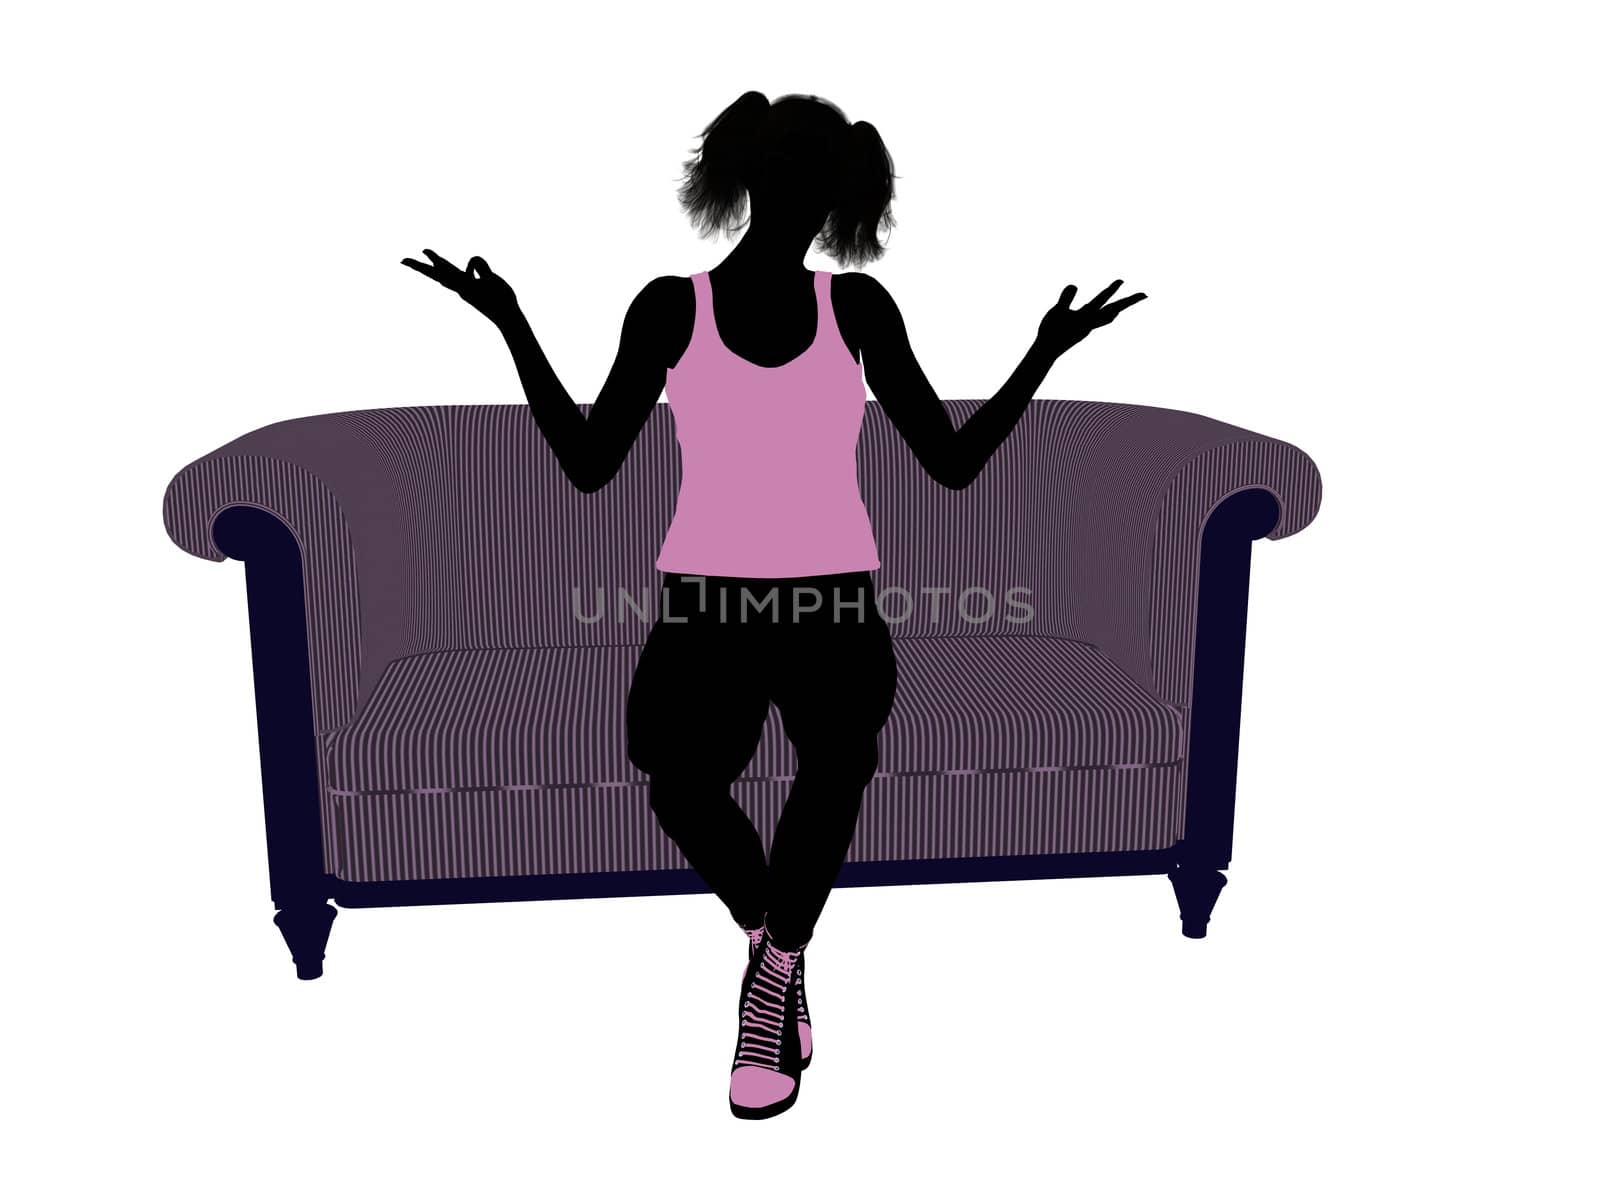 Female Athlete Sitting On A Sofa Illustration Silhouette by kathygold